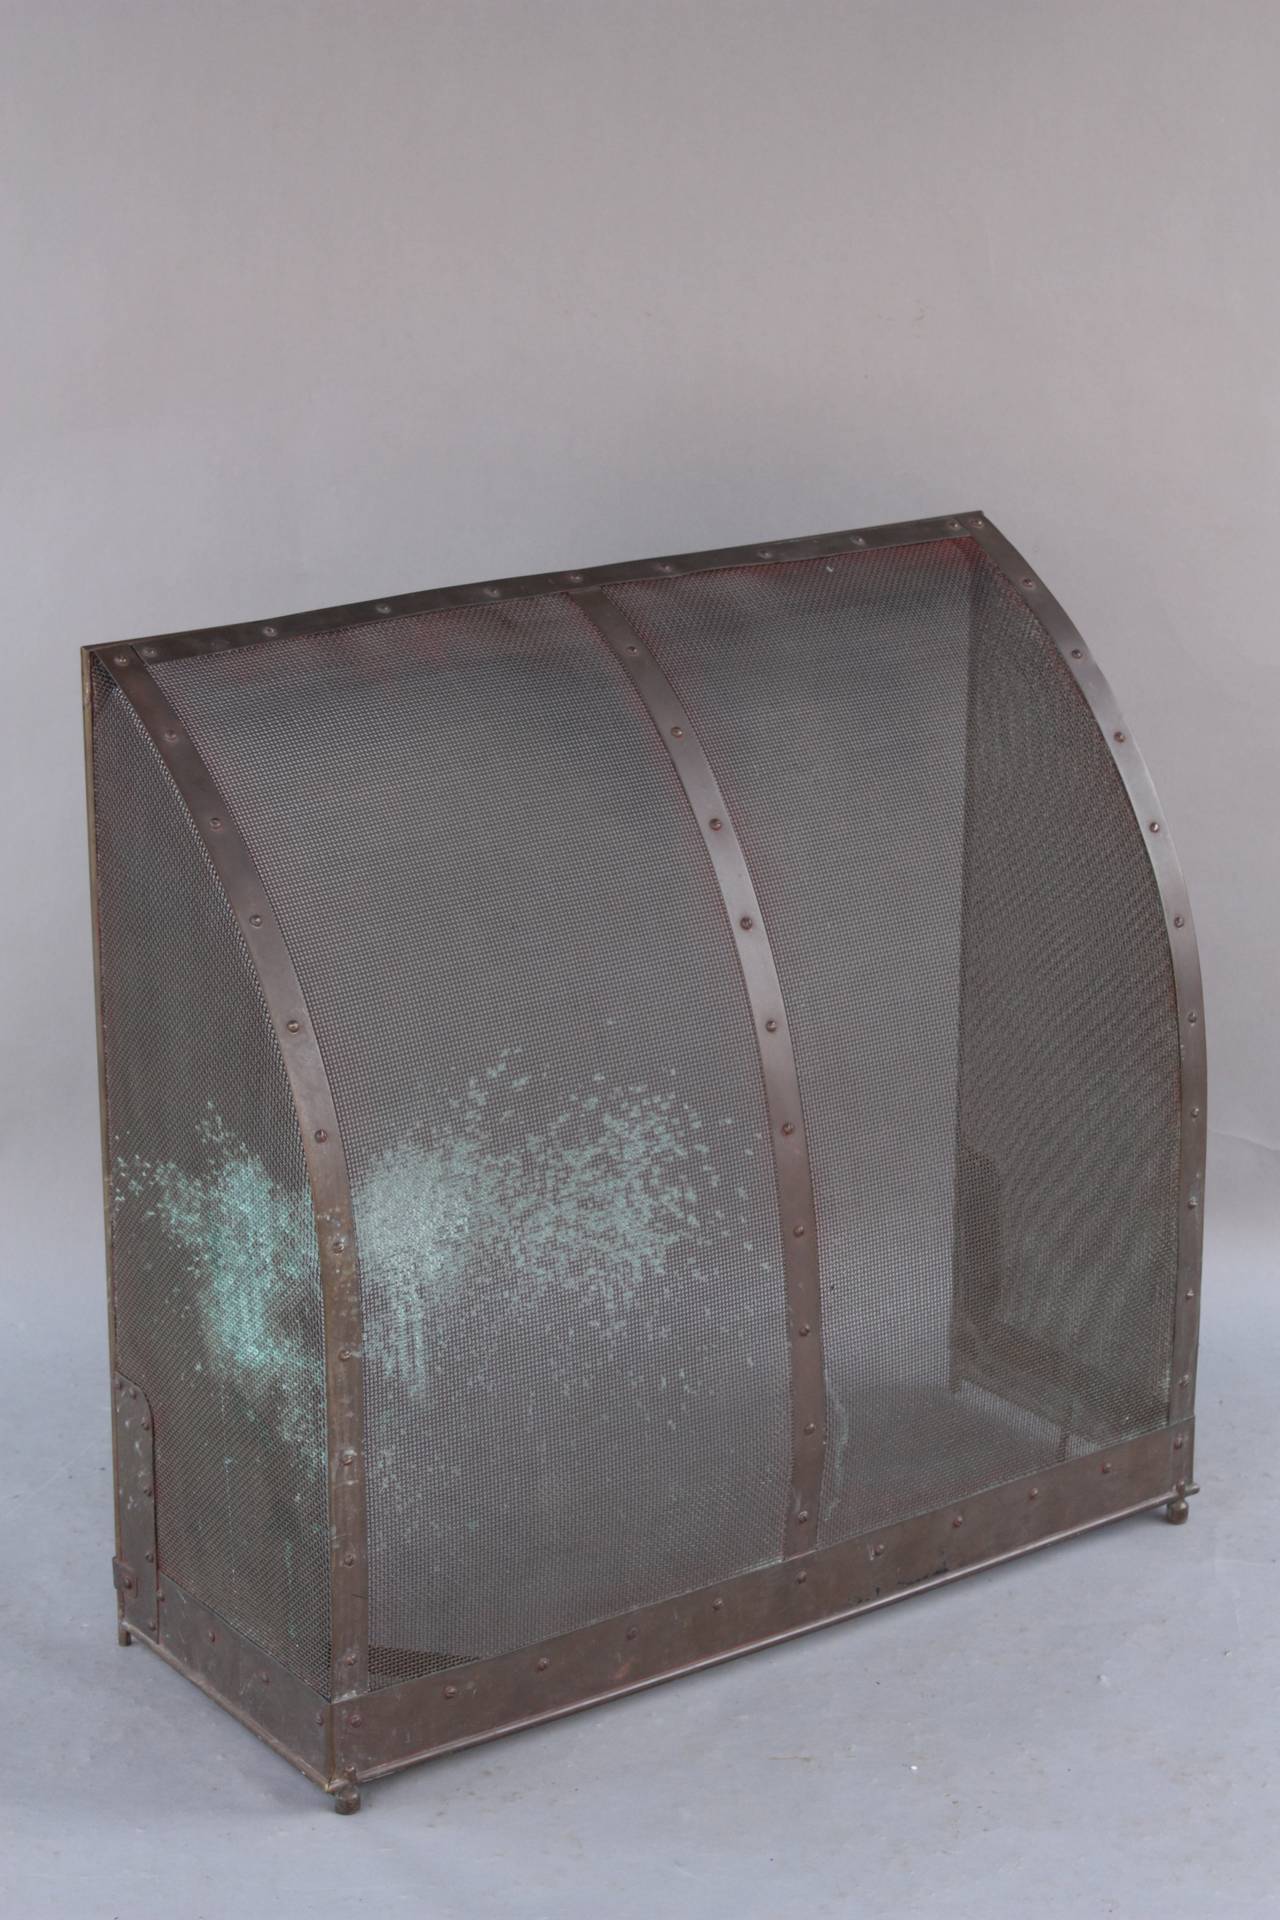 Freestanding fire screen with curved front. It measures 31